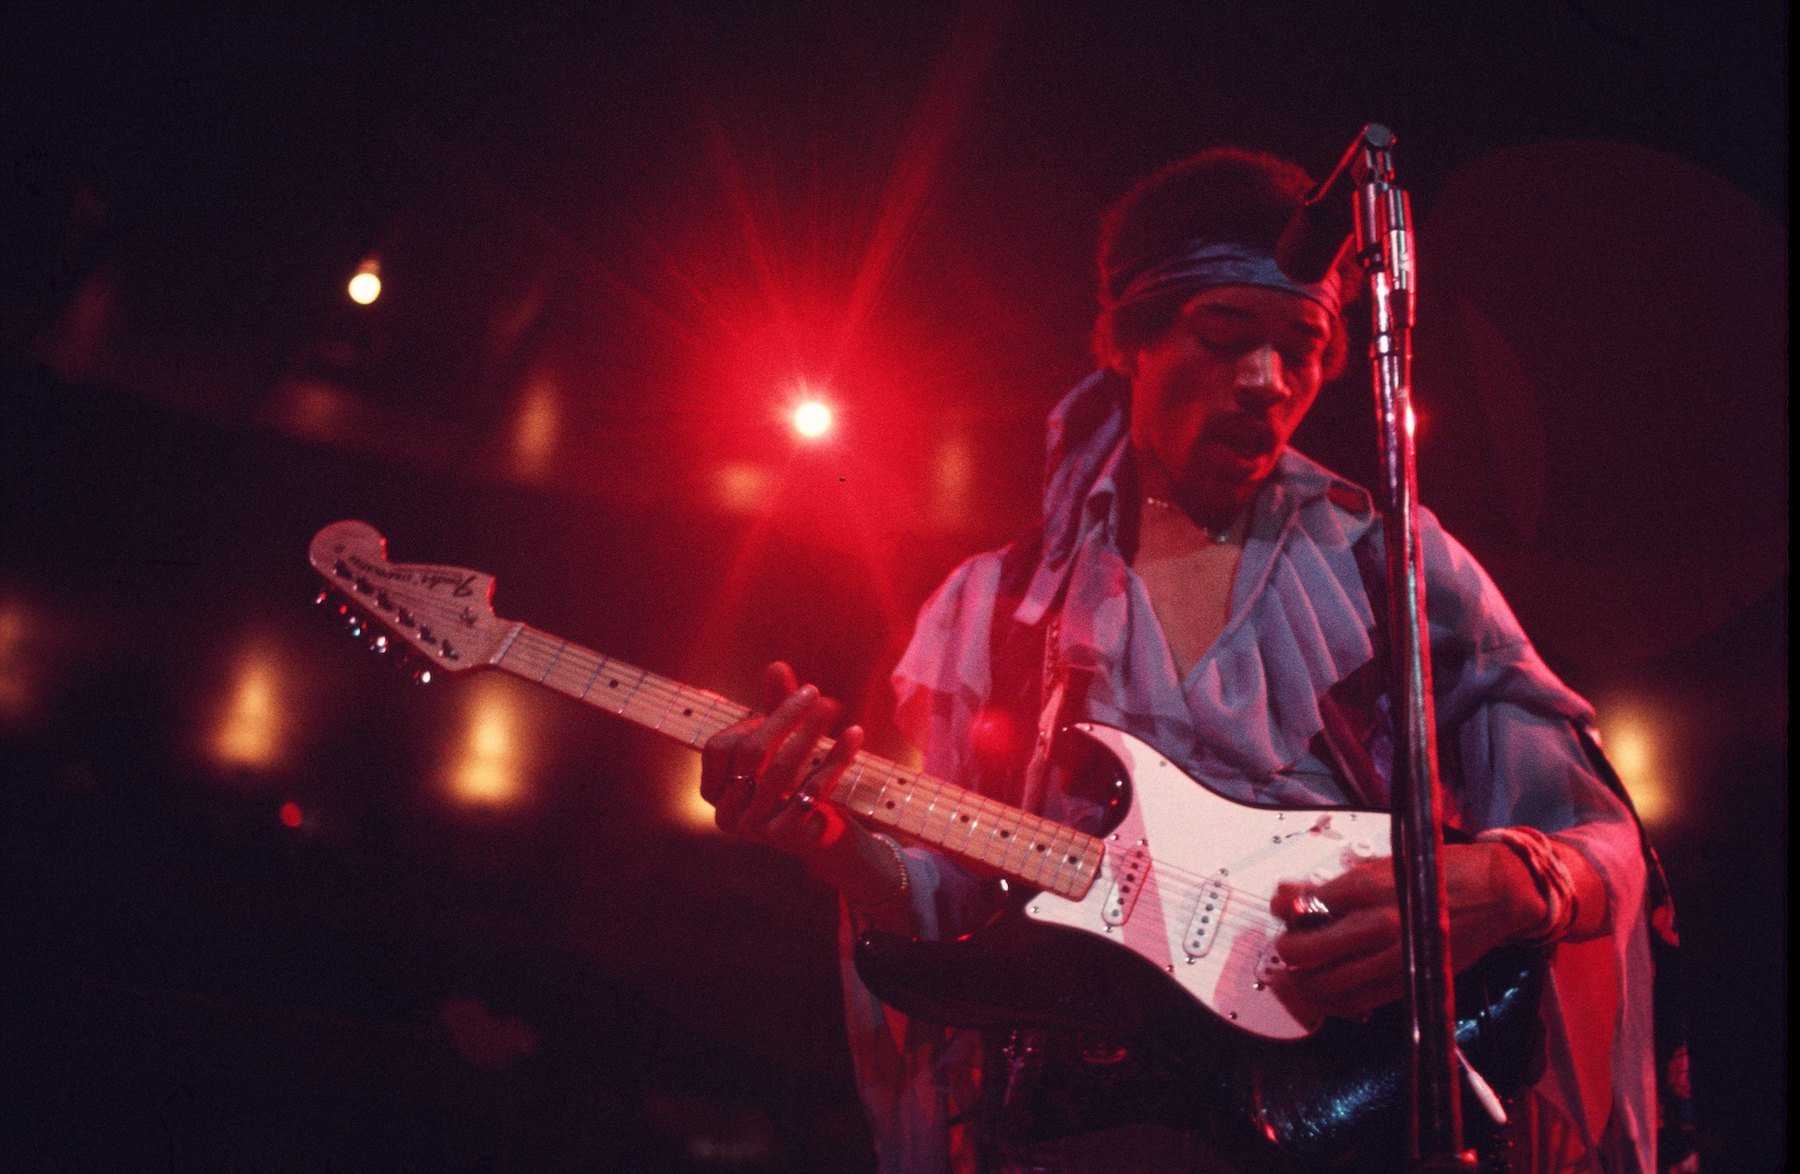 Jimi Hendrix, who performed at the Woodstock festival, playing guitar